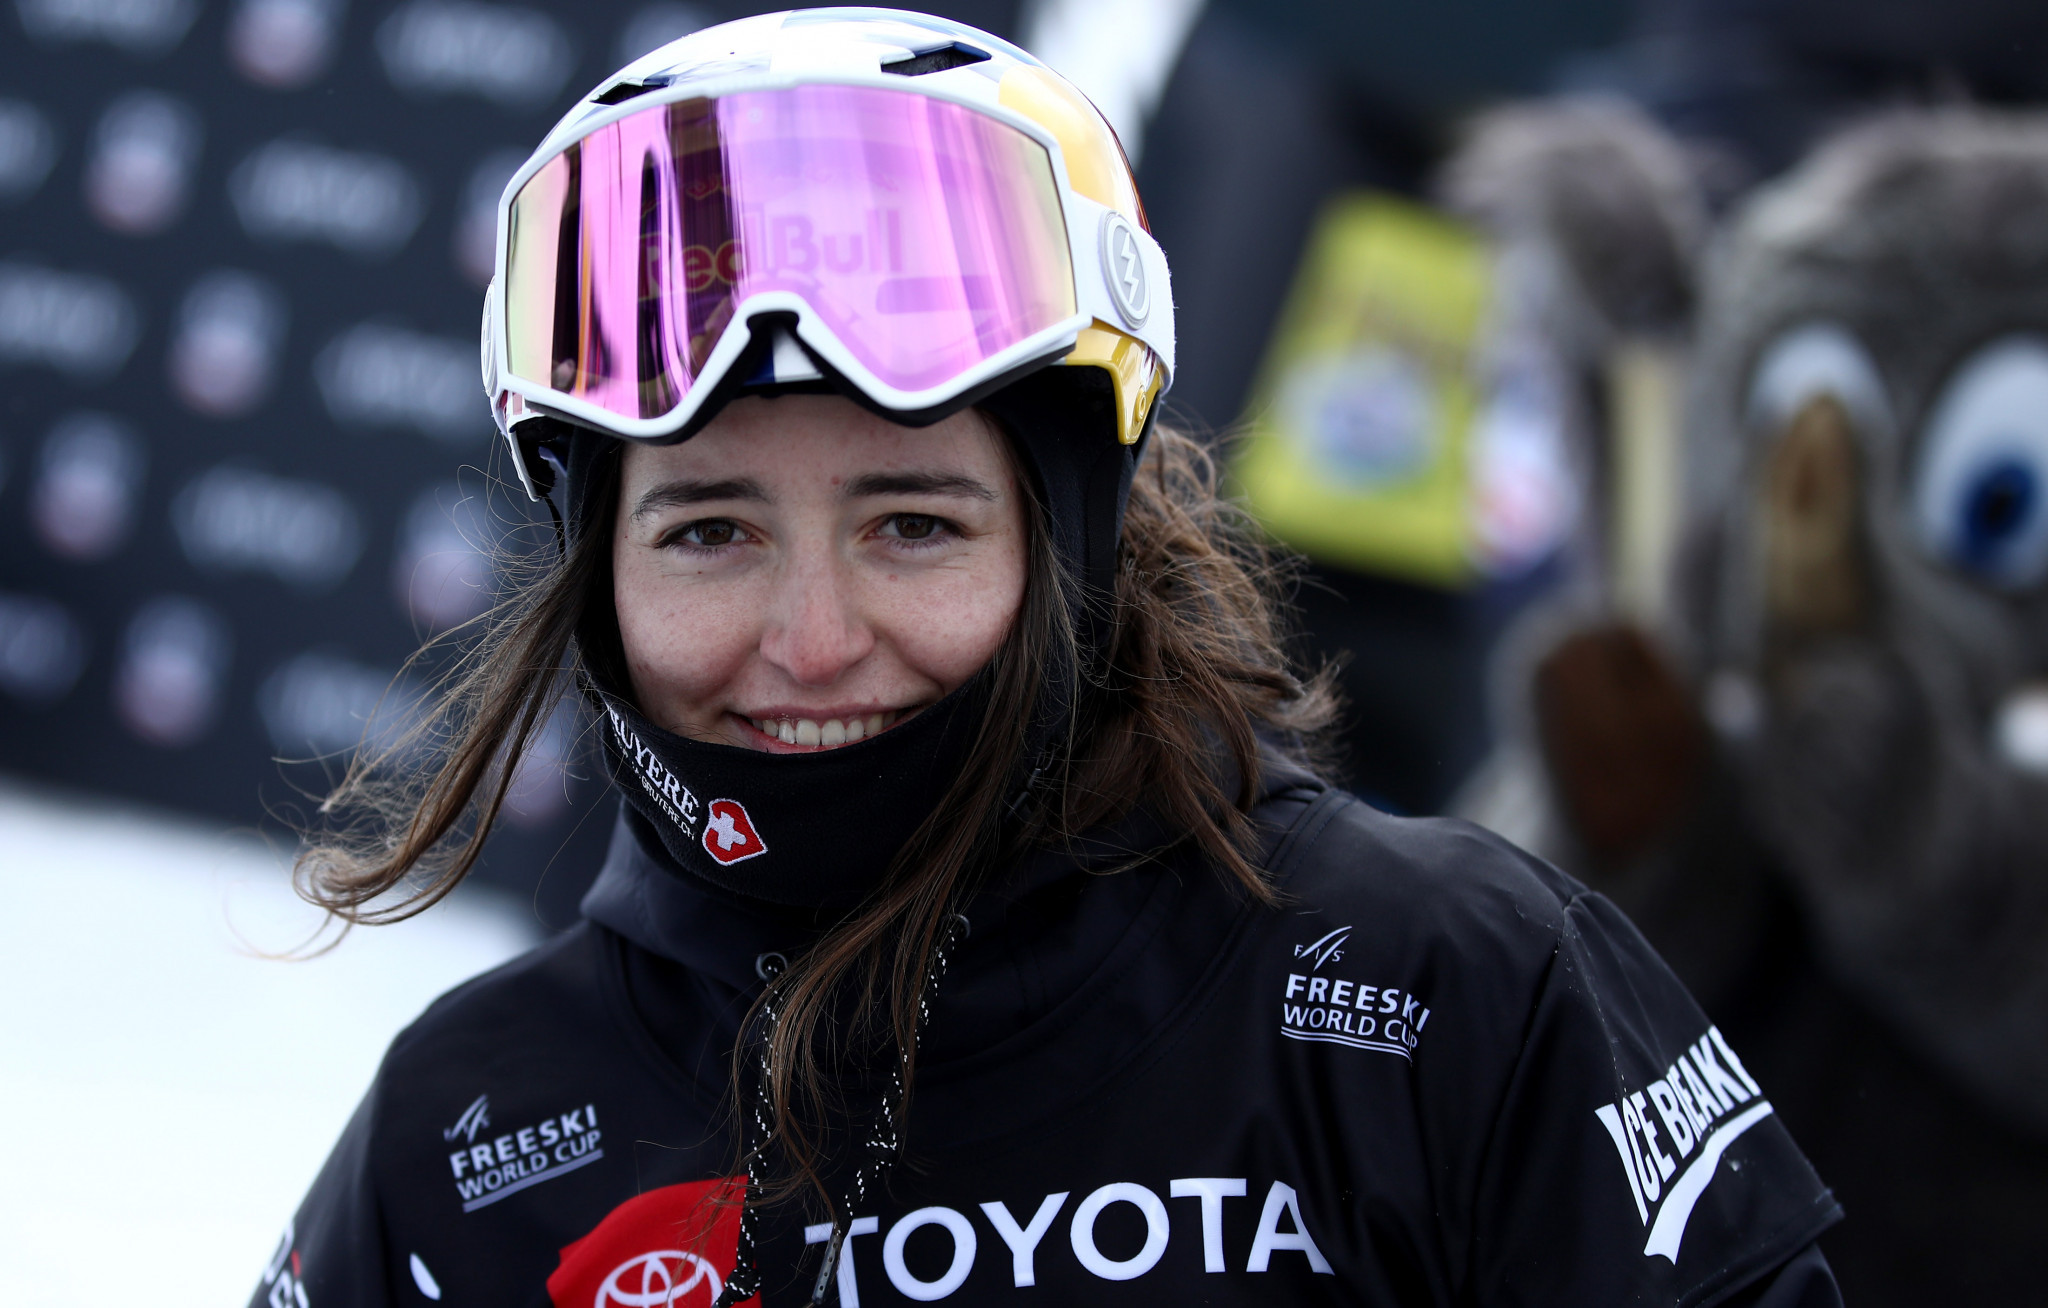 Gremaud and Forehand clinch maiden World Cup wins in ski slopestyle at Mammoth Mountain